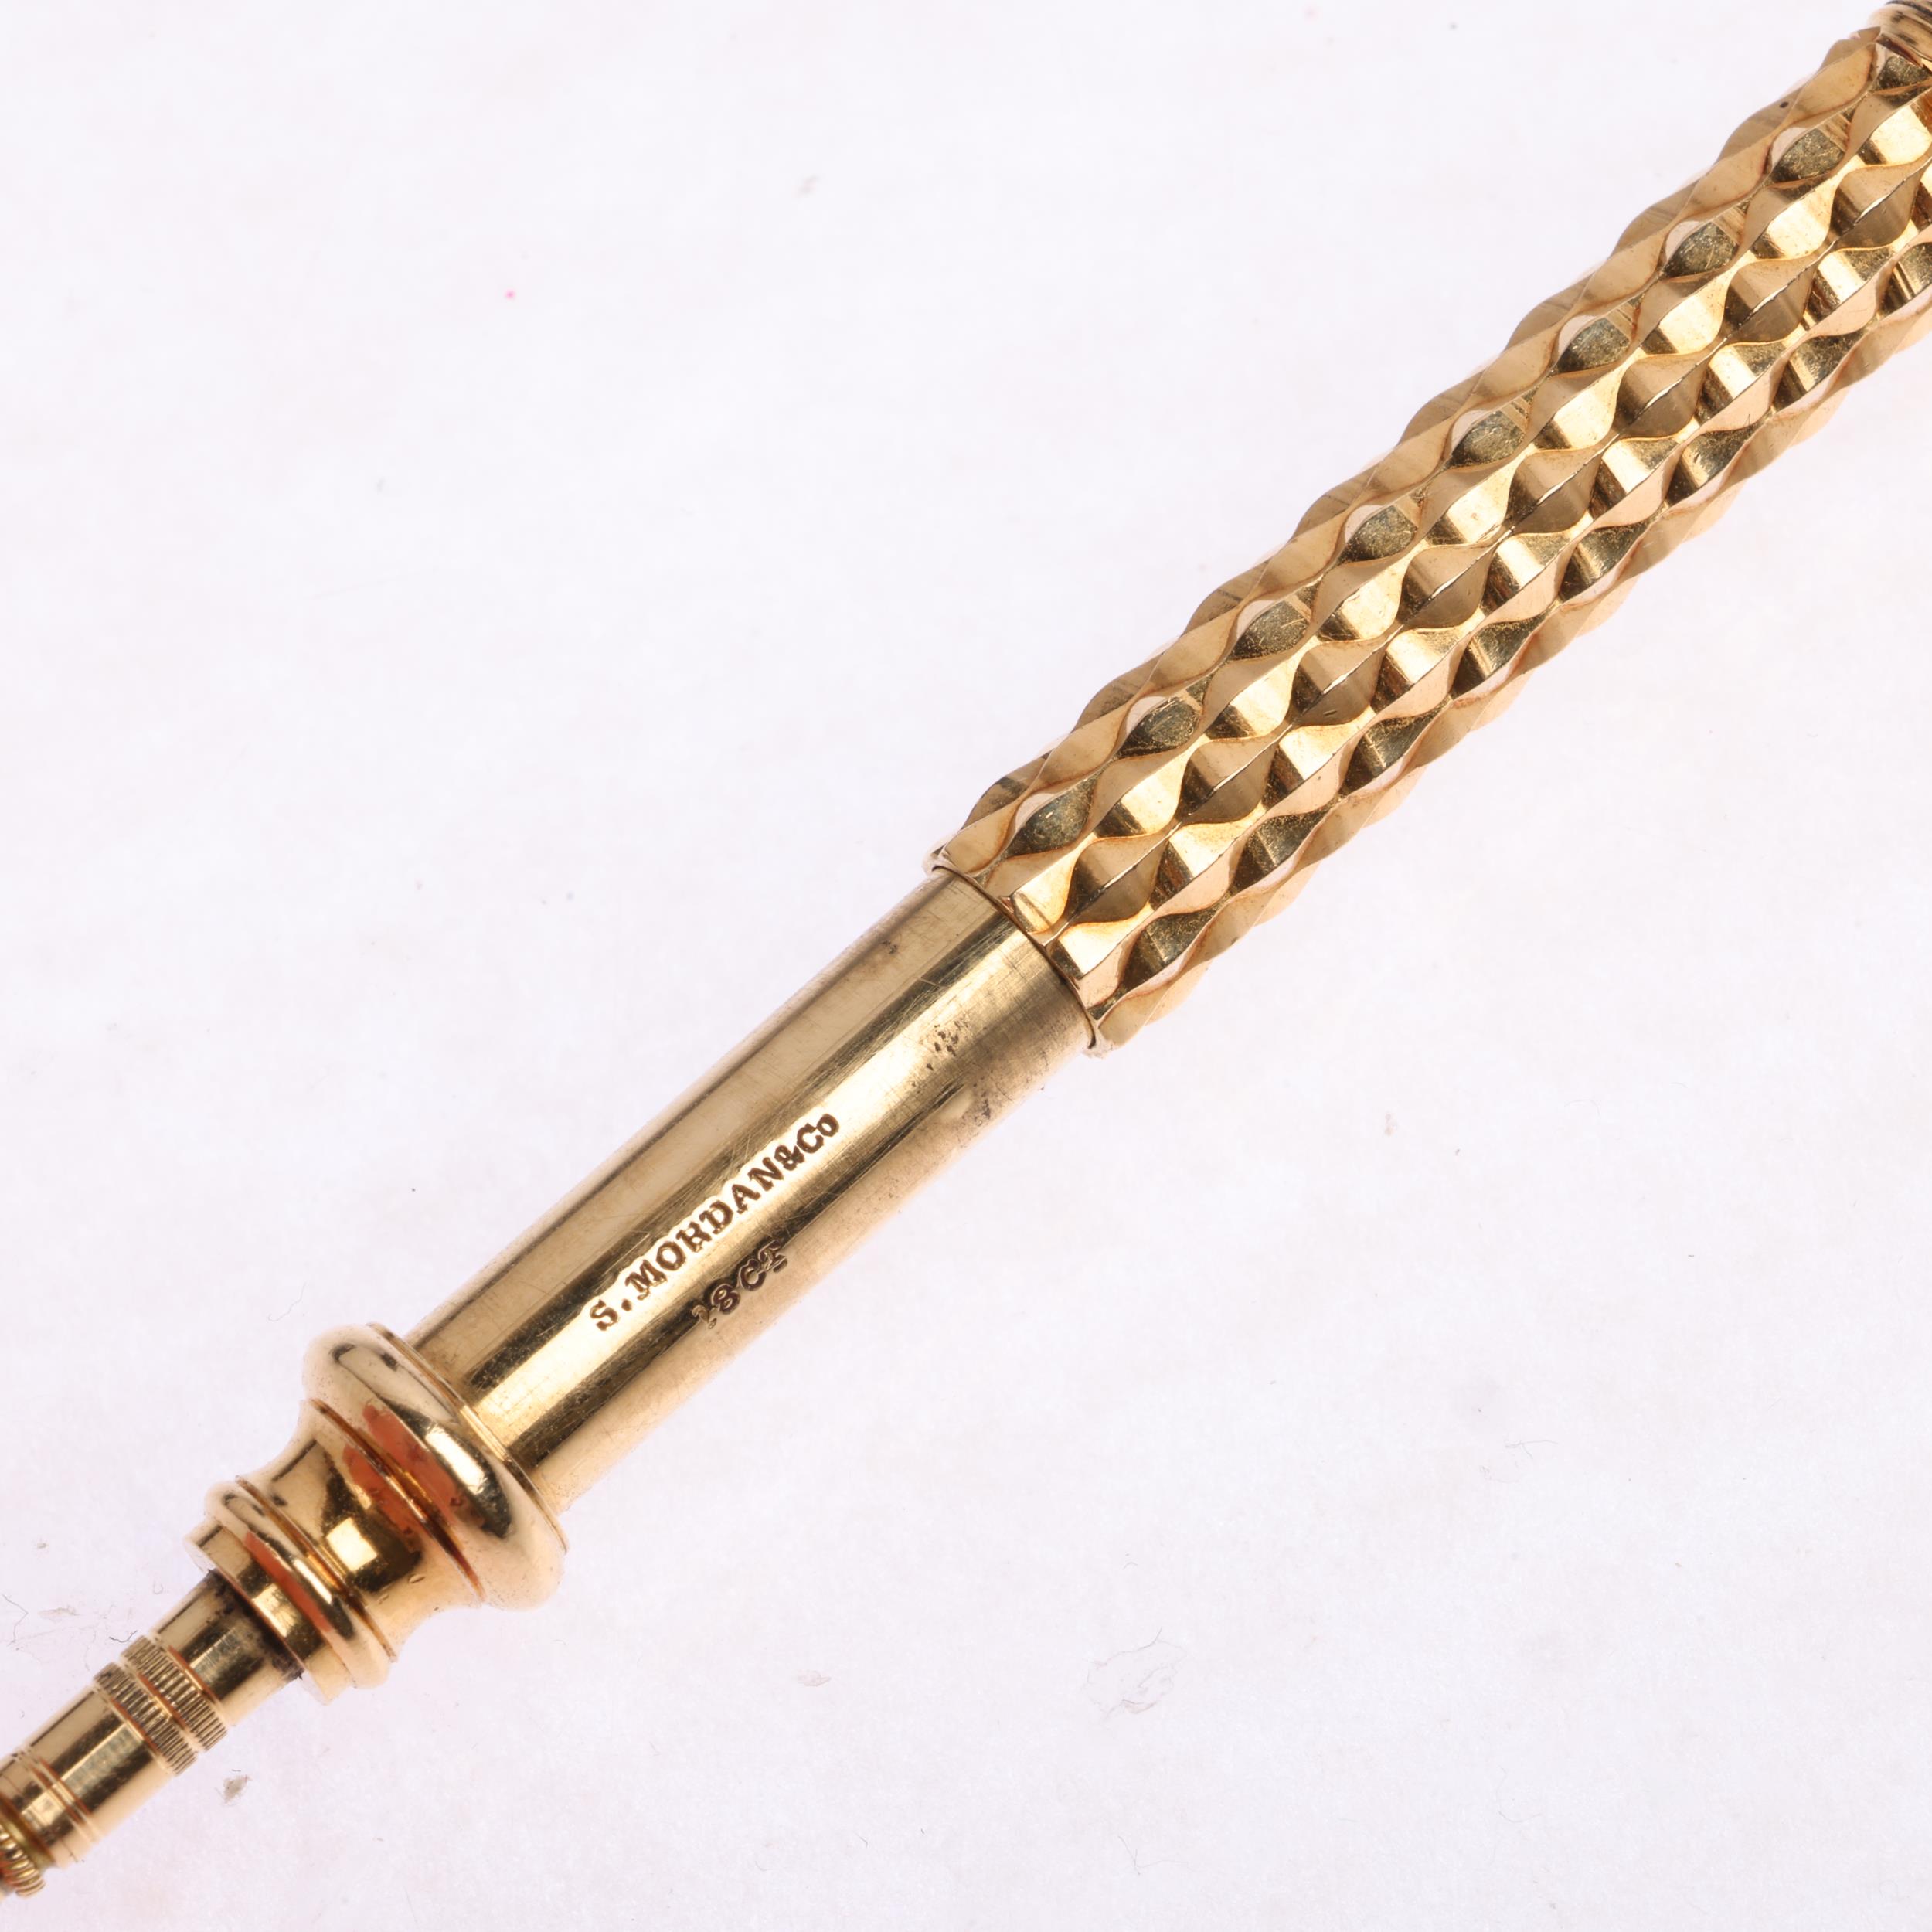 SAMPSON MORDAN & CO - an Art Deco 18ct gold propelling pencil, model no. J531, extended length - Image 2 of 4